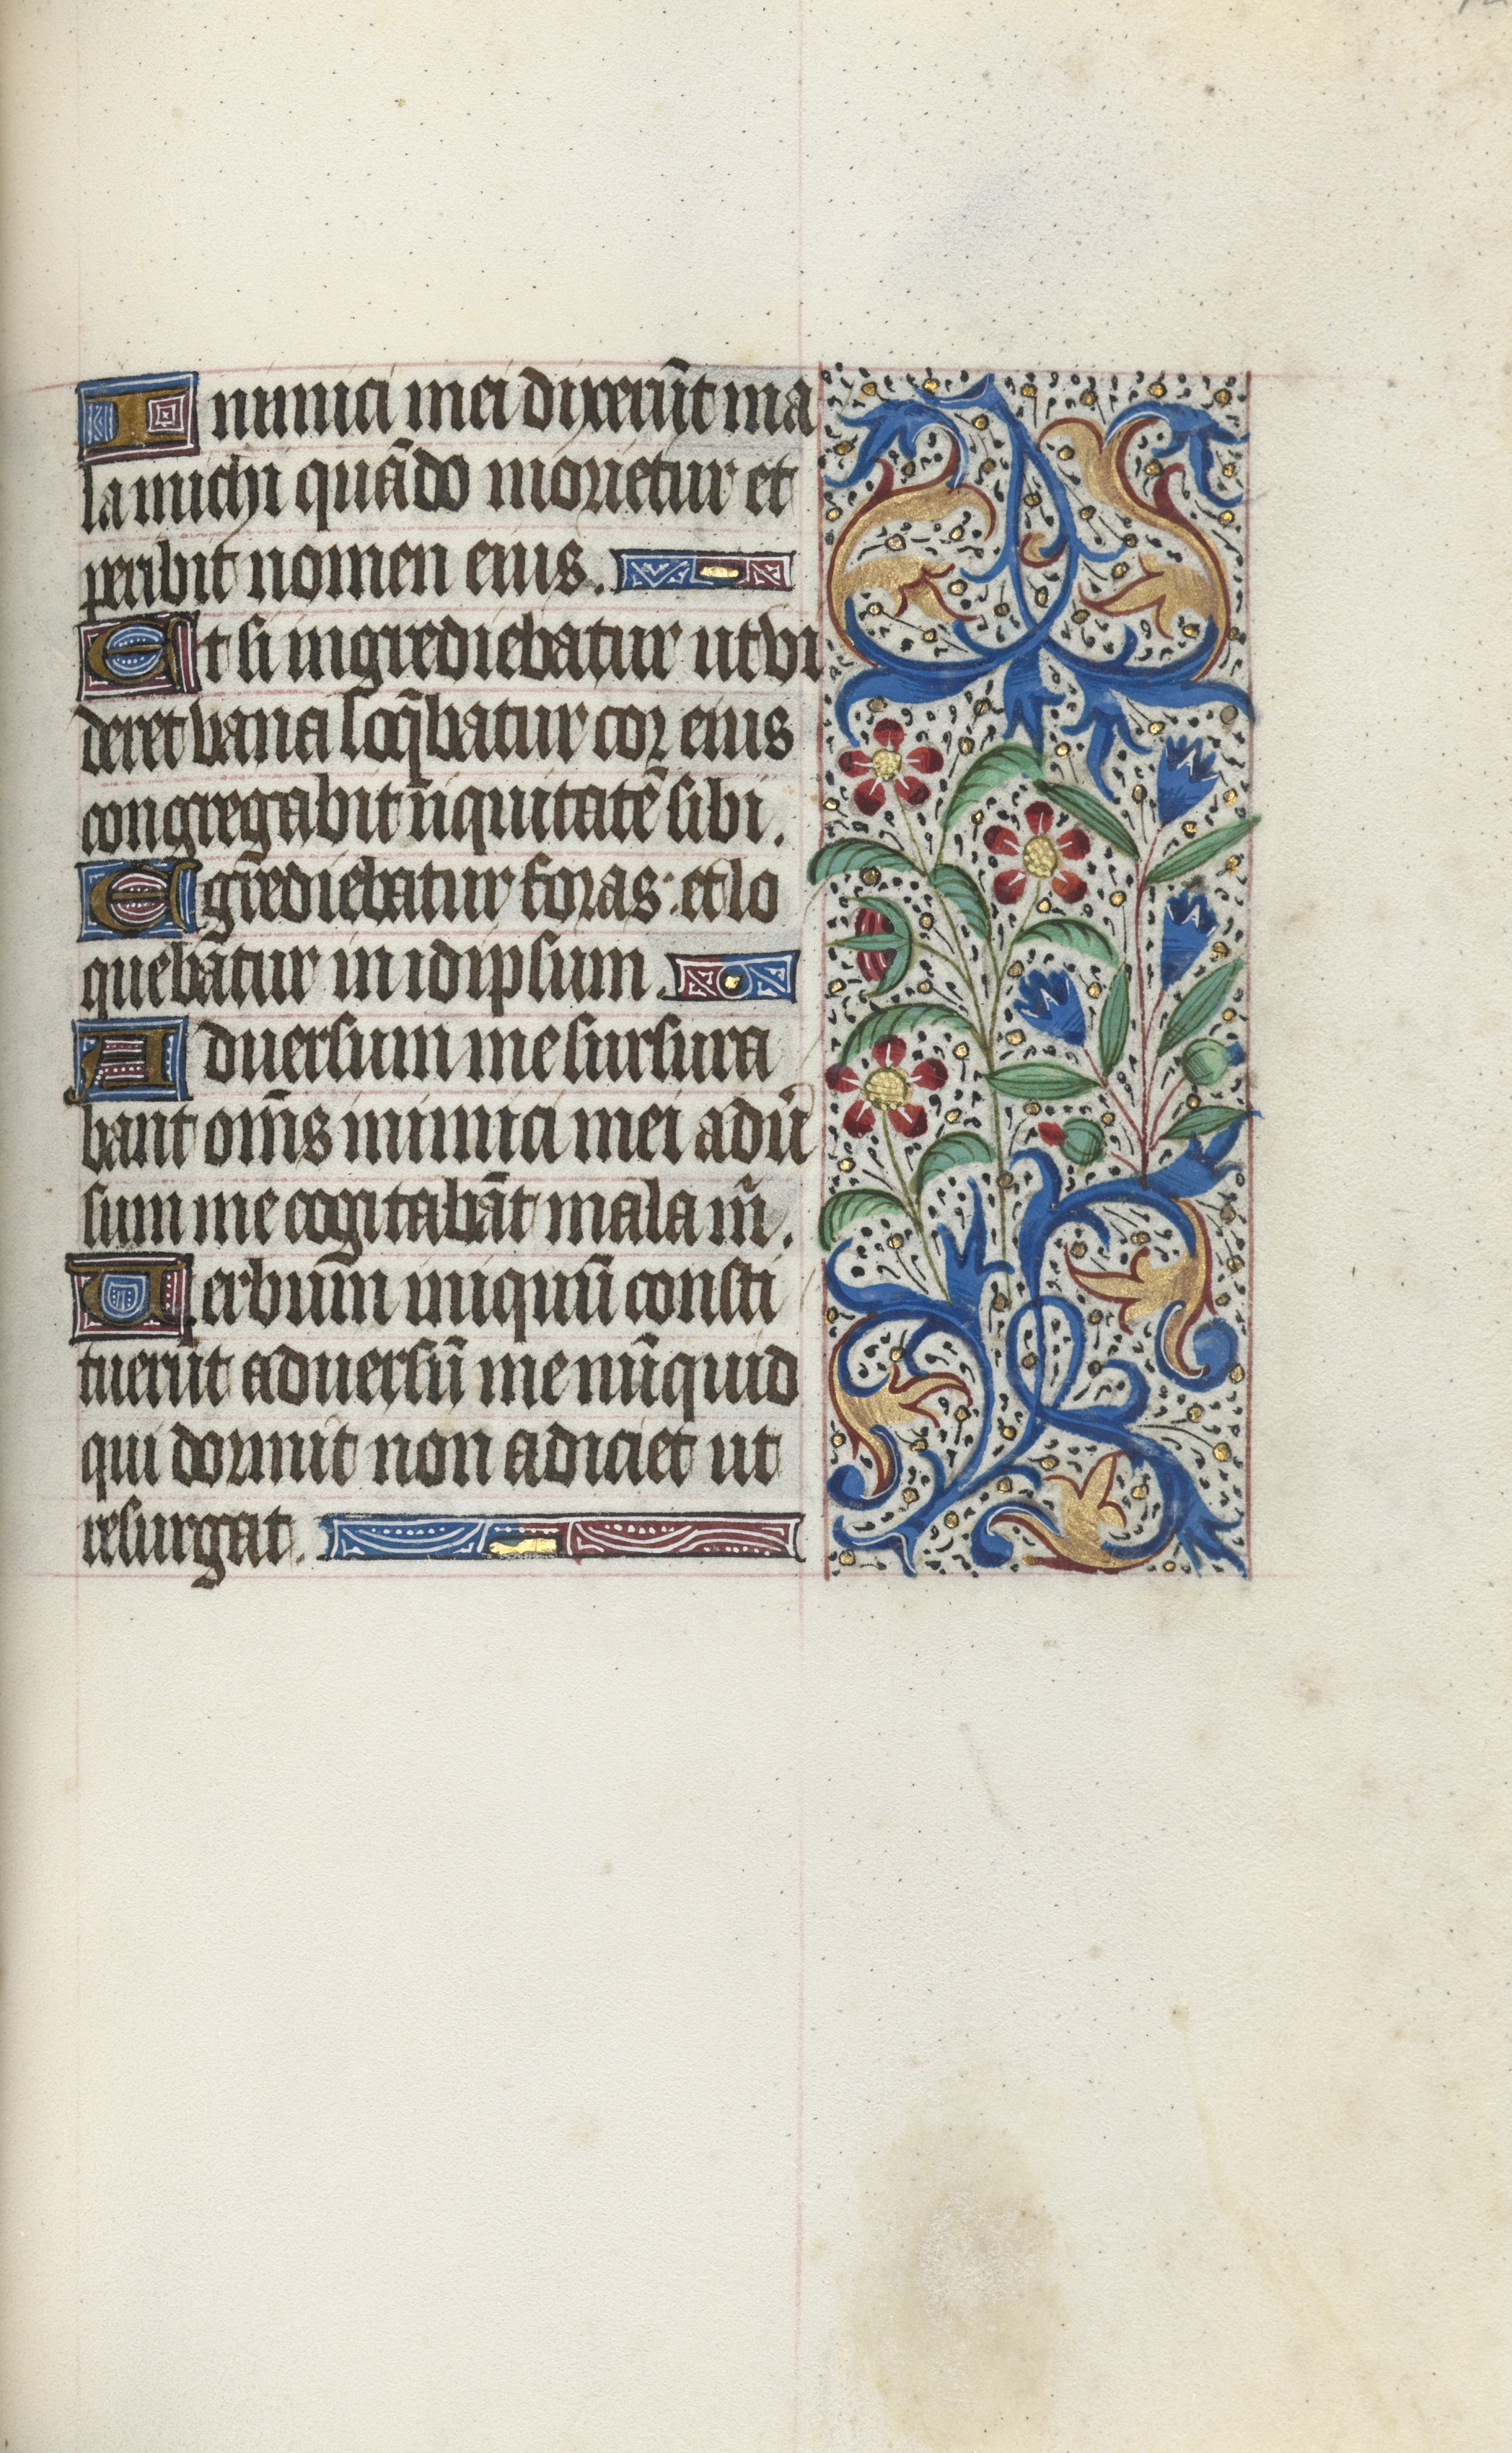 Book of Hours (Use of Rouen): fol. 128r